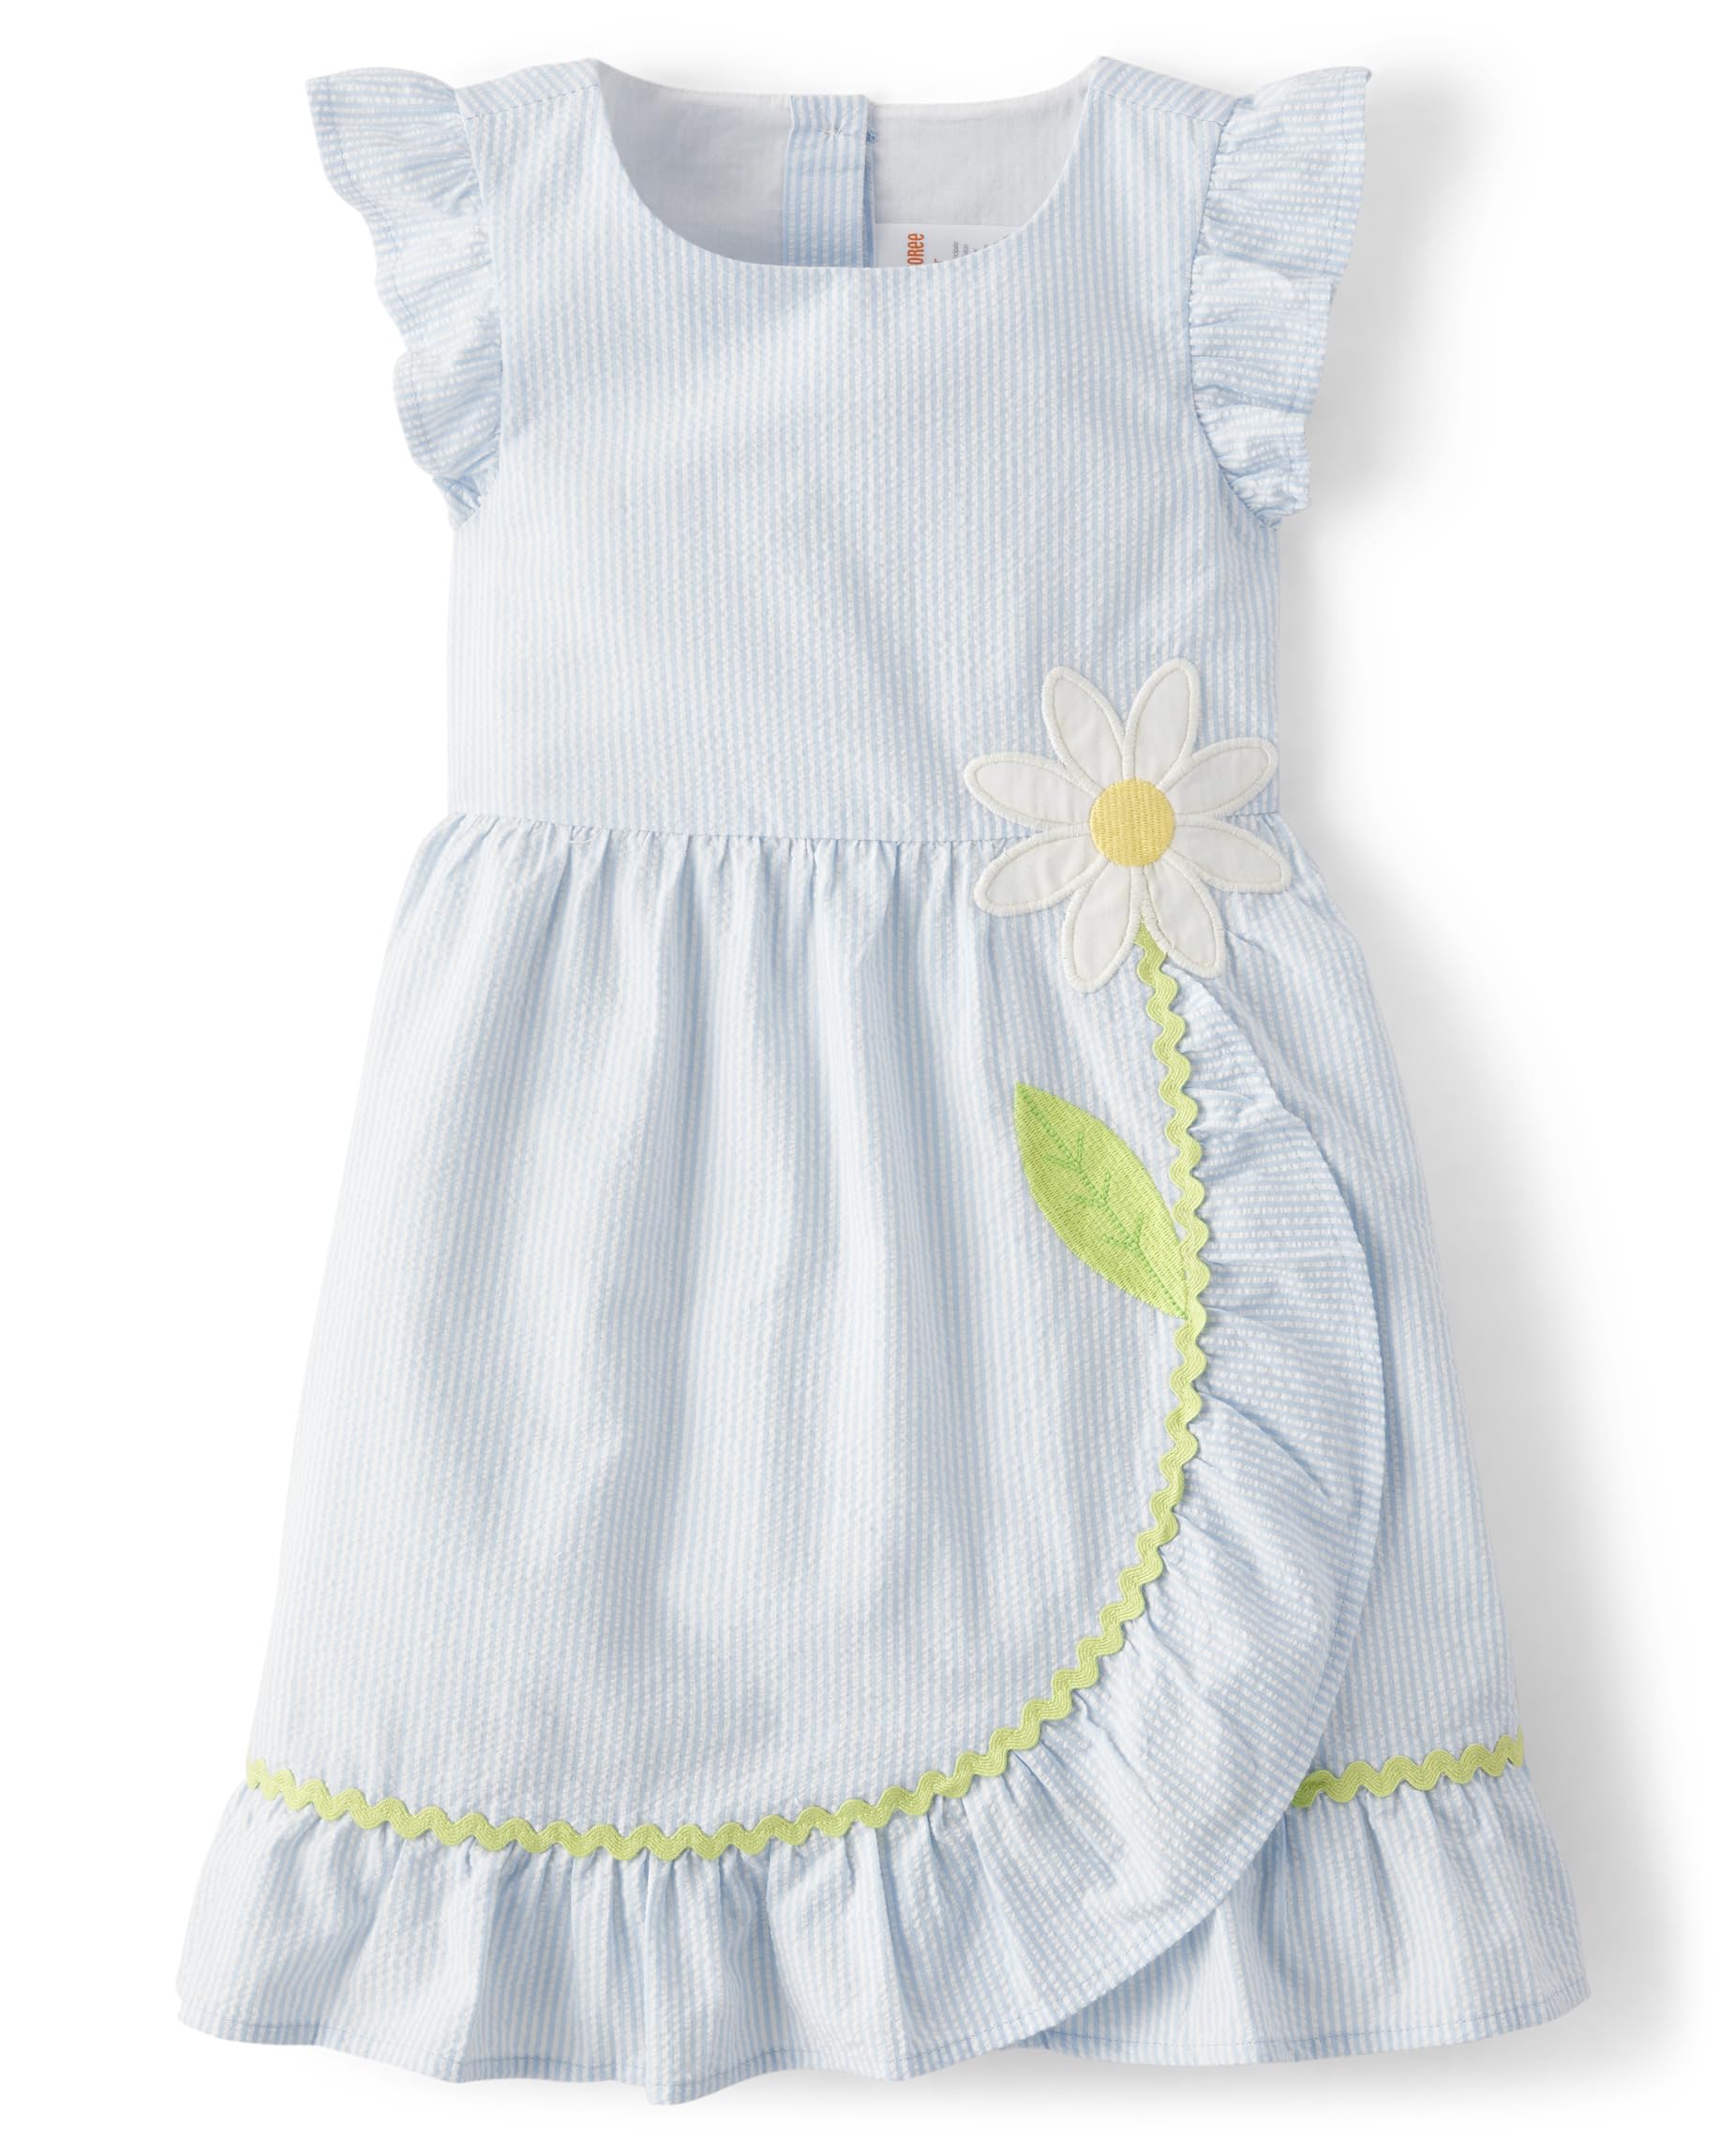 Gymboree Girls' and Toddler Short Sleeve Casual Spring Dresses